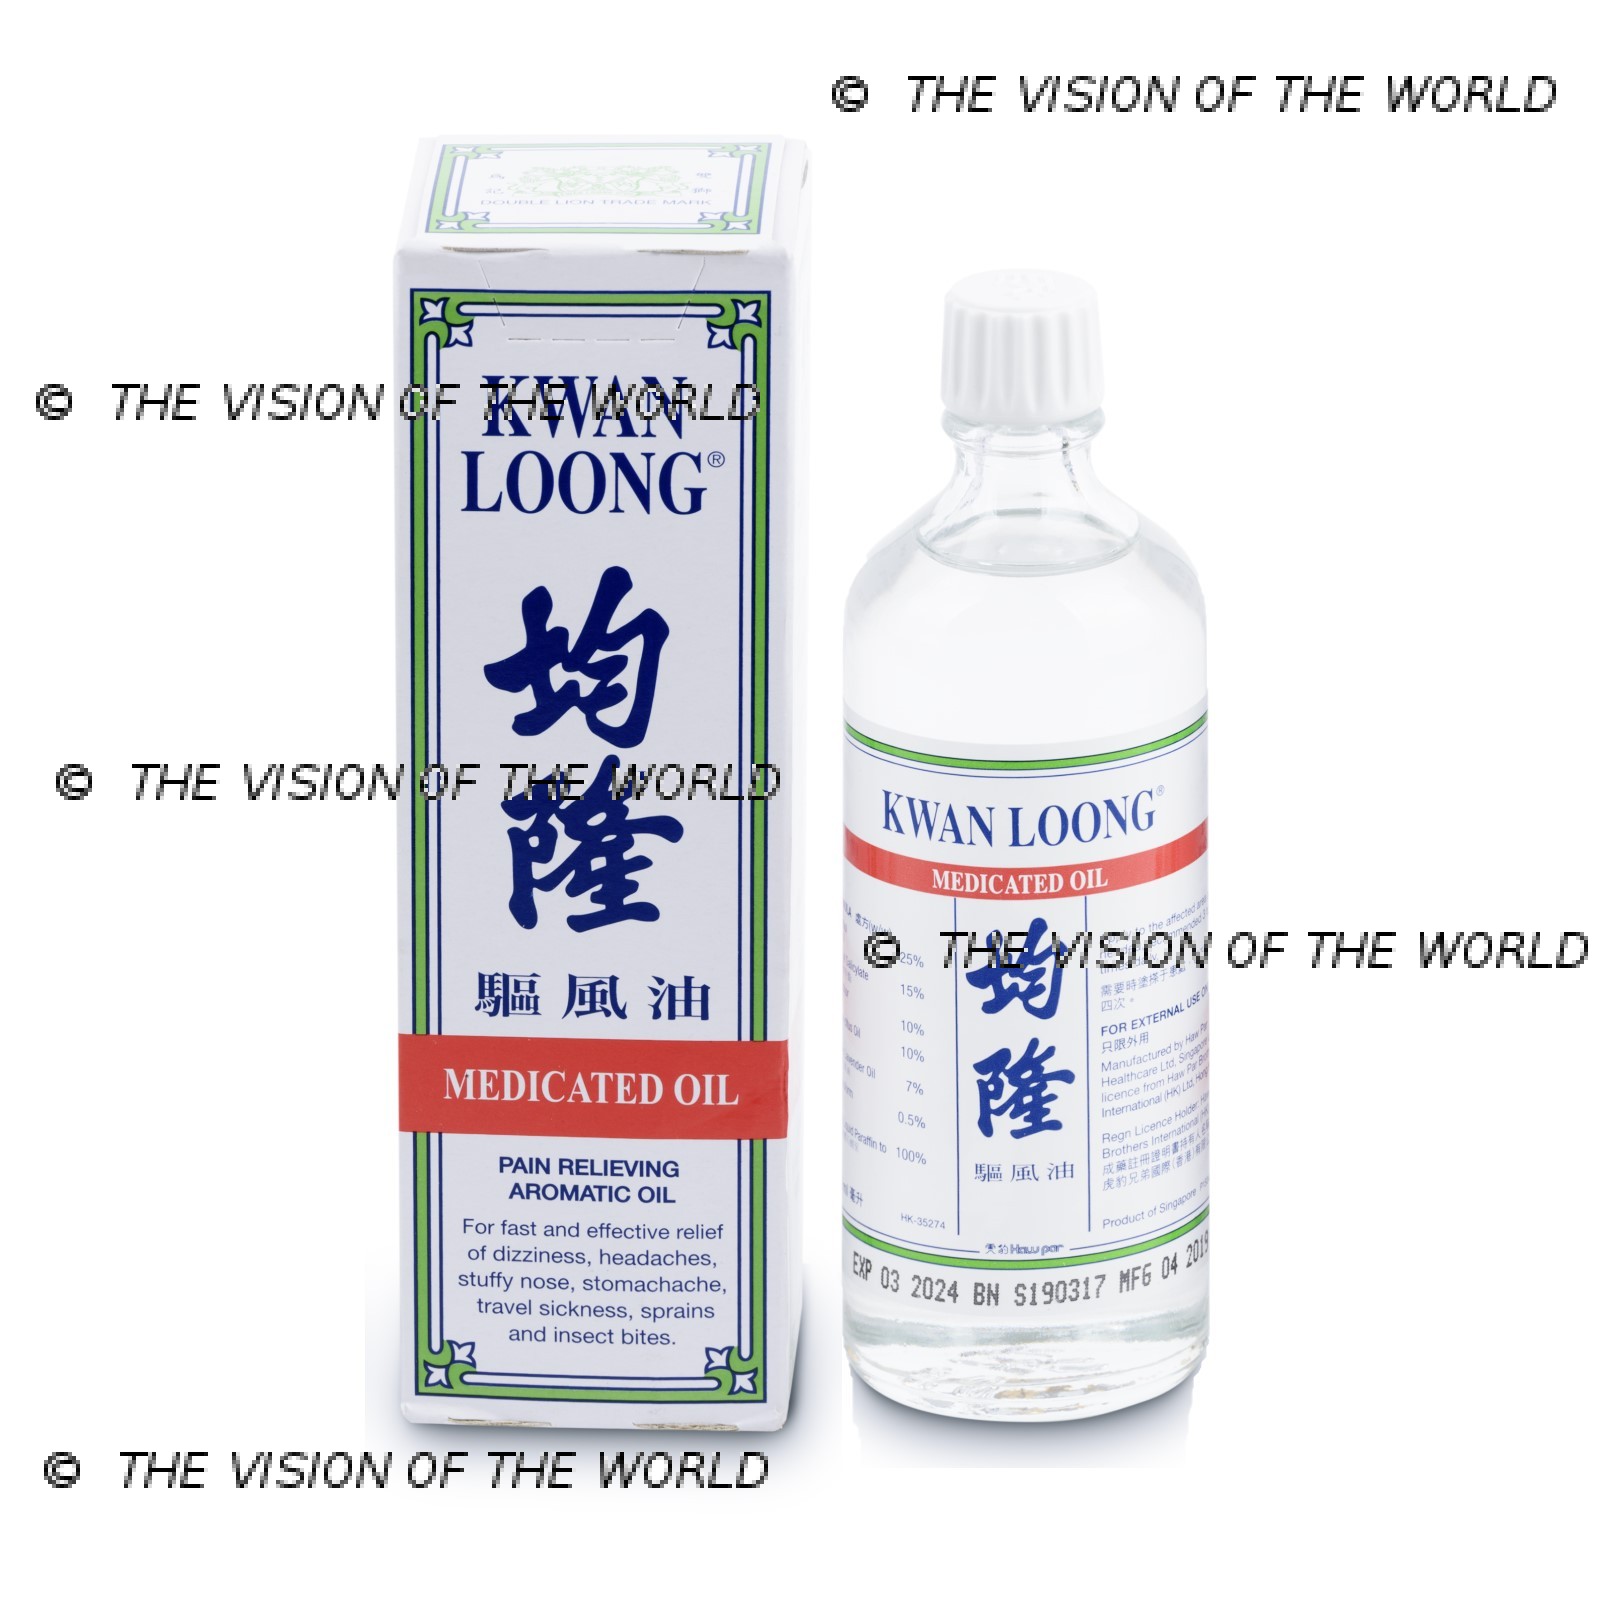 https://www.thevisionoftheworld.com/wp-content/uploads/2022/05/Kwan-Loong-Oil-57ml.jpg